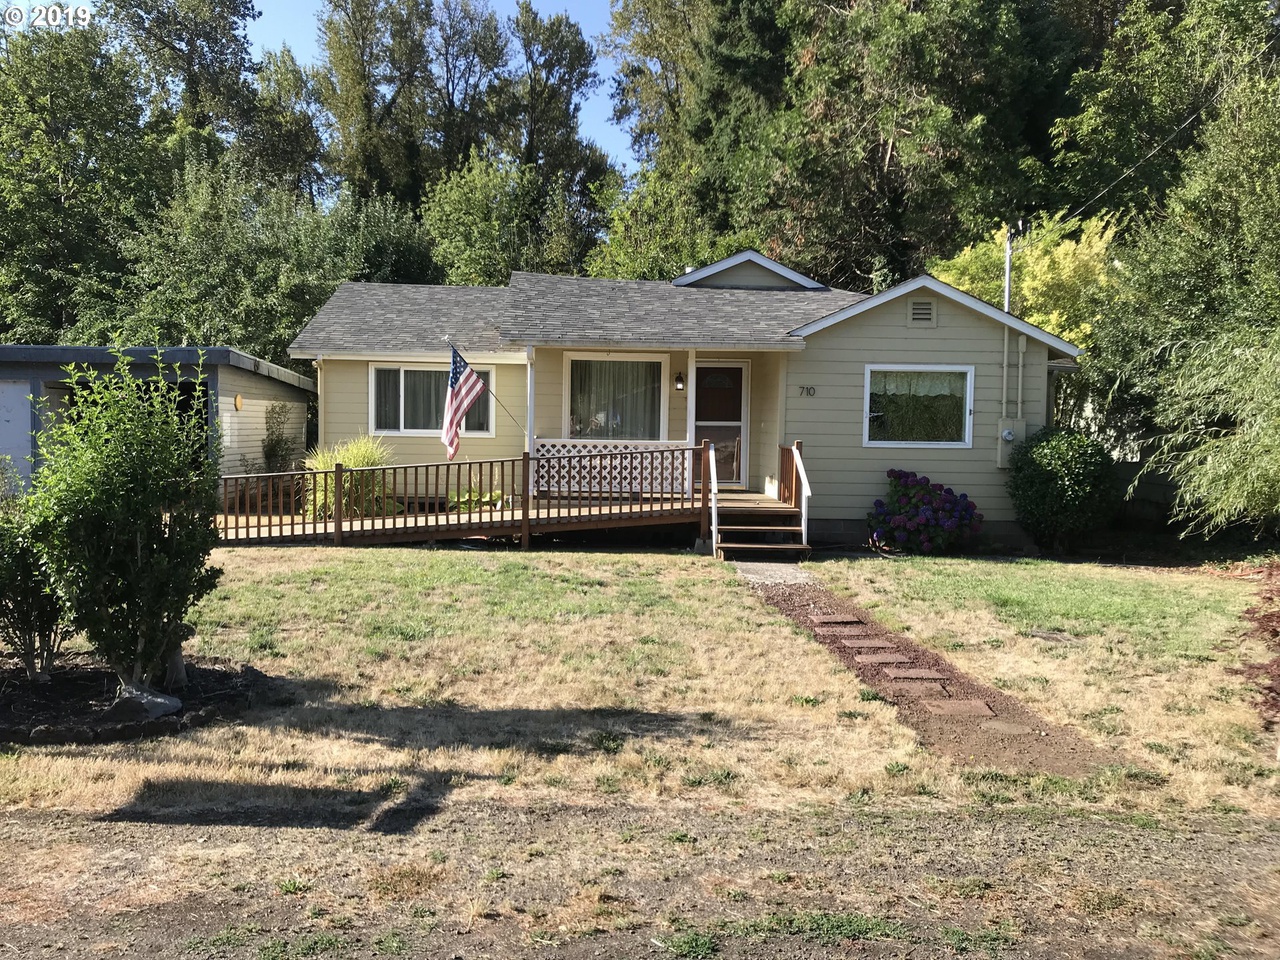 710 Calapooia Ave, Brownsville, OR 97327 | MLS# 19377228 | Redfin